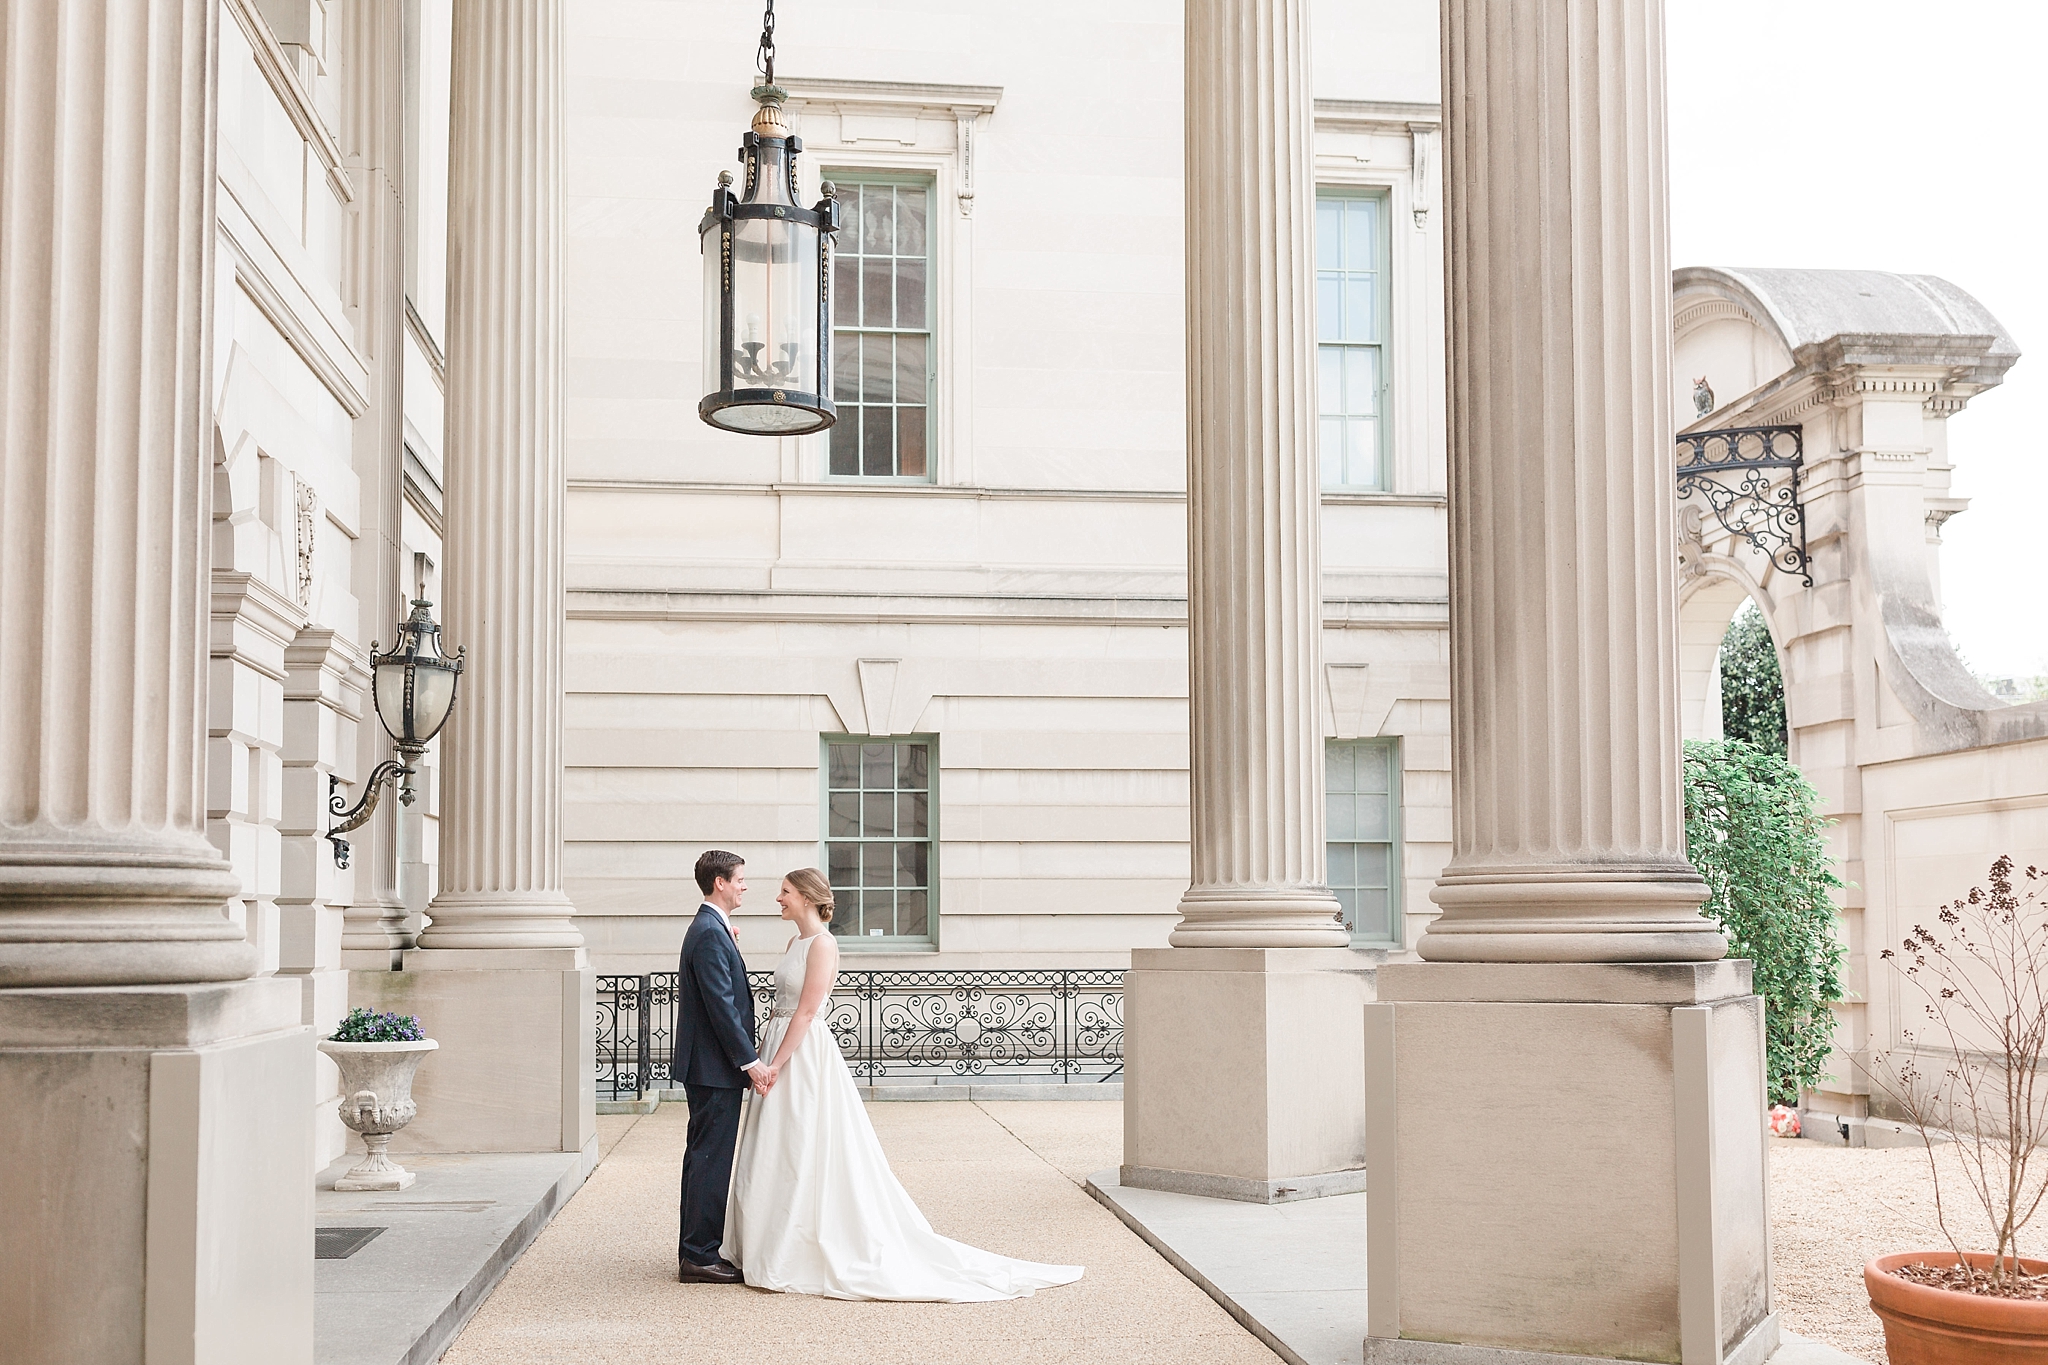 Find out when the best time is to book a wedding photographer in the Washington, DC area!